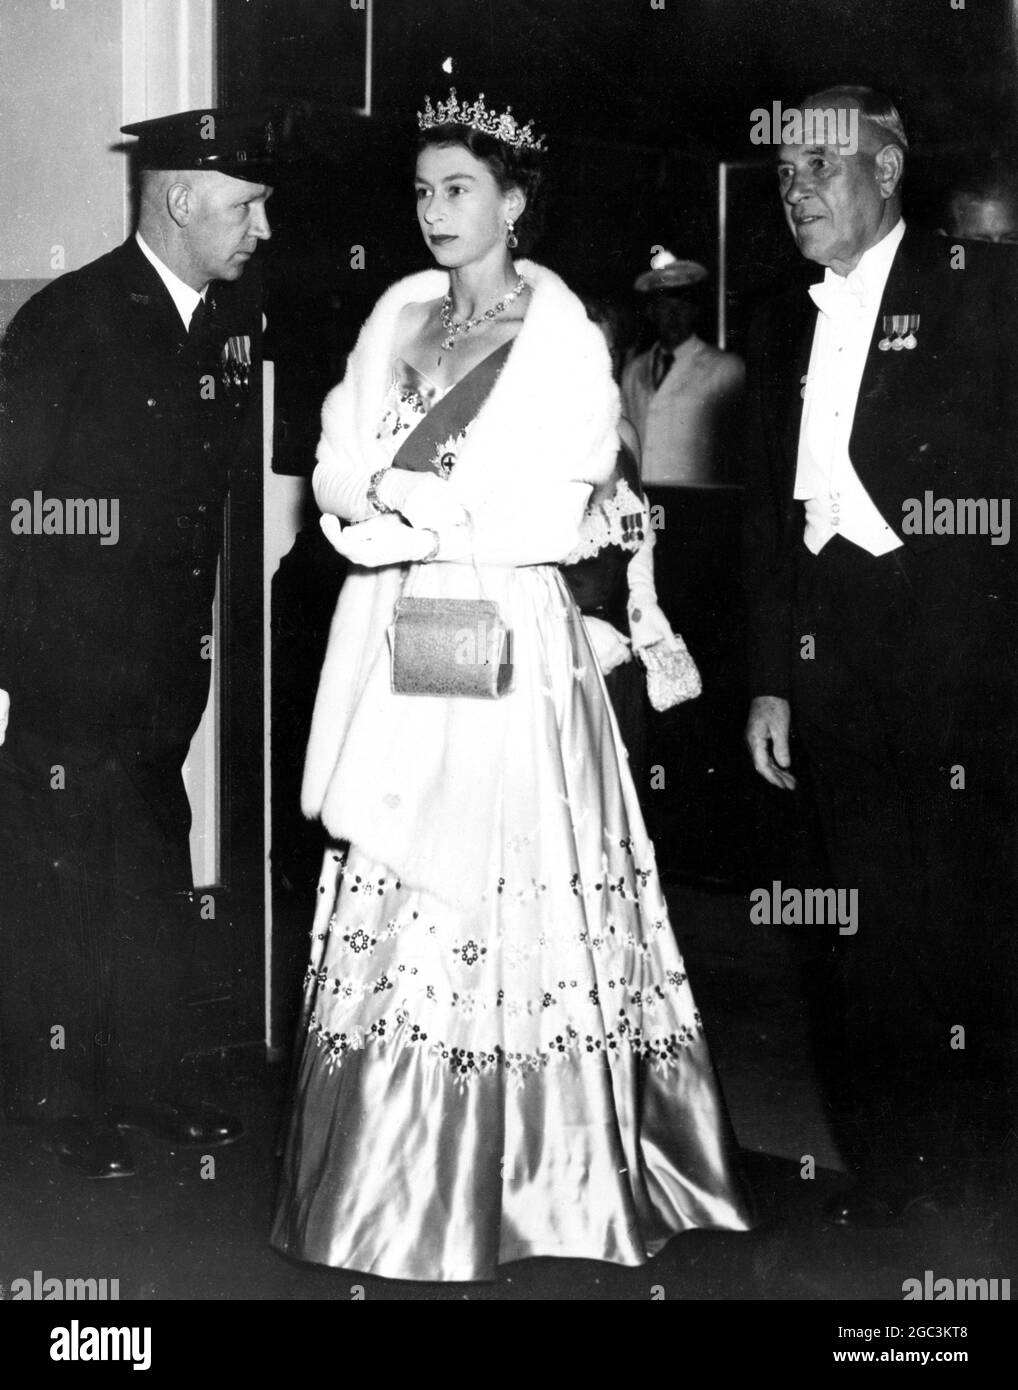 Queen Elizabeth II arriving at the State banquet with Premier J Cain of Victoria Melbourne Commonwealth Tour 5th March 1954 Stock Photo